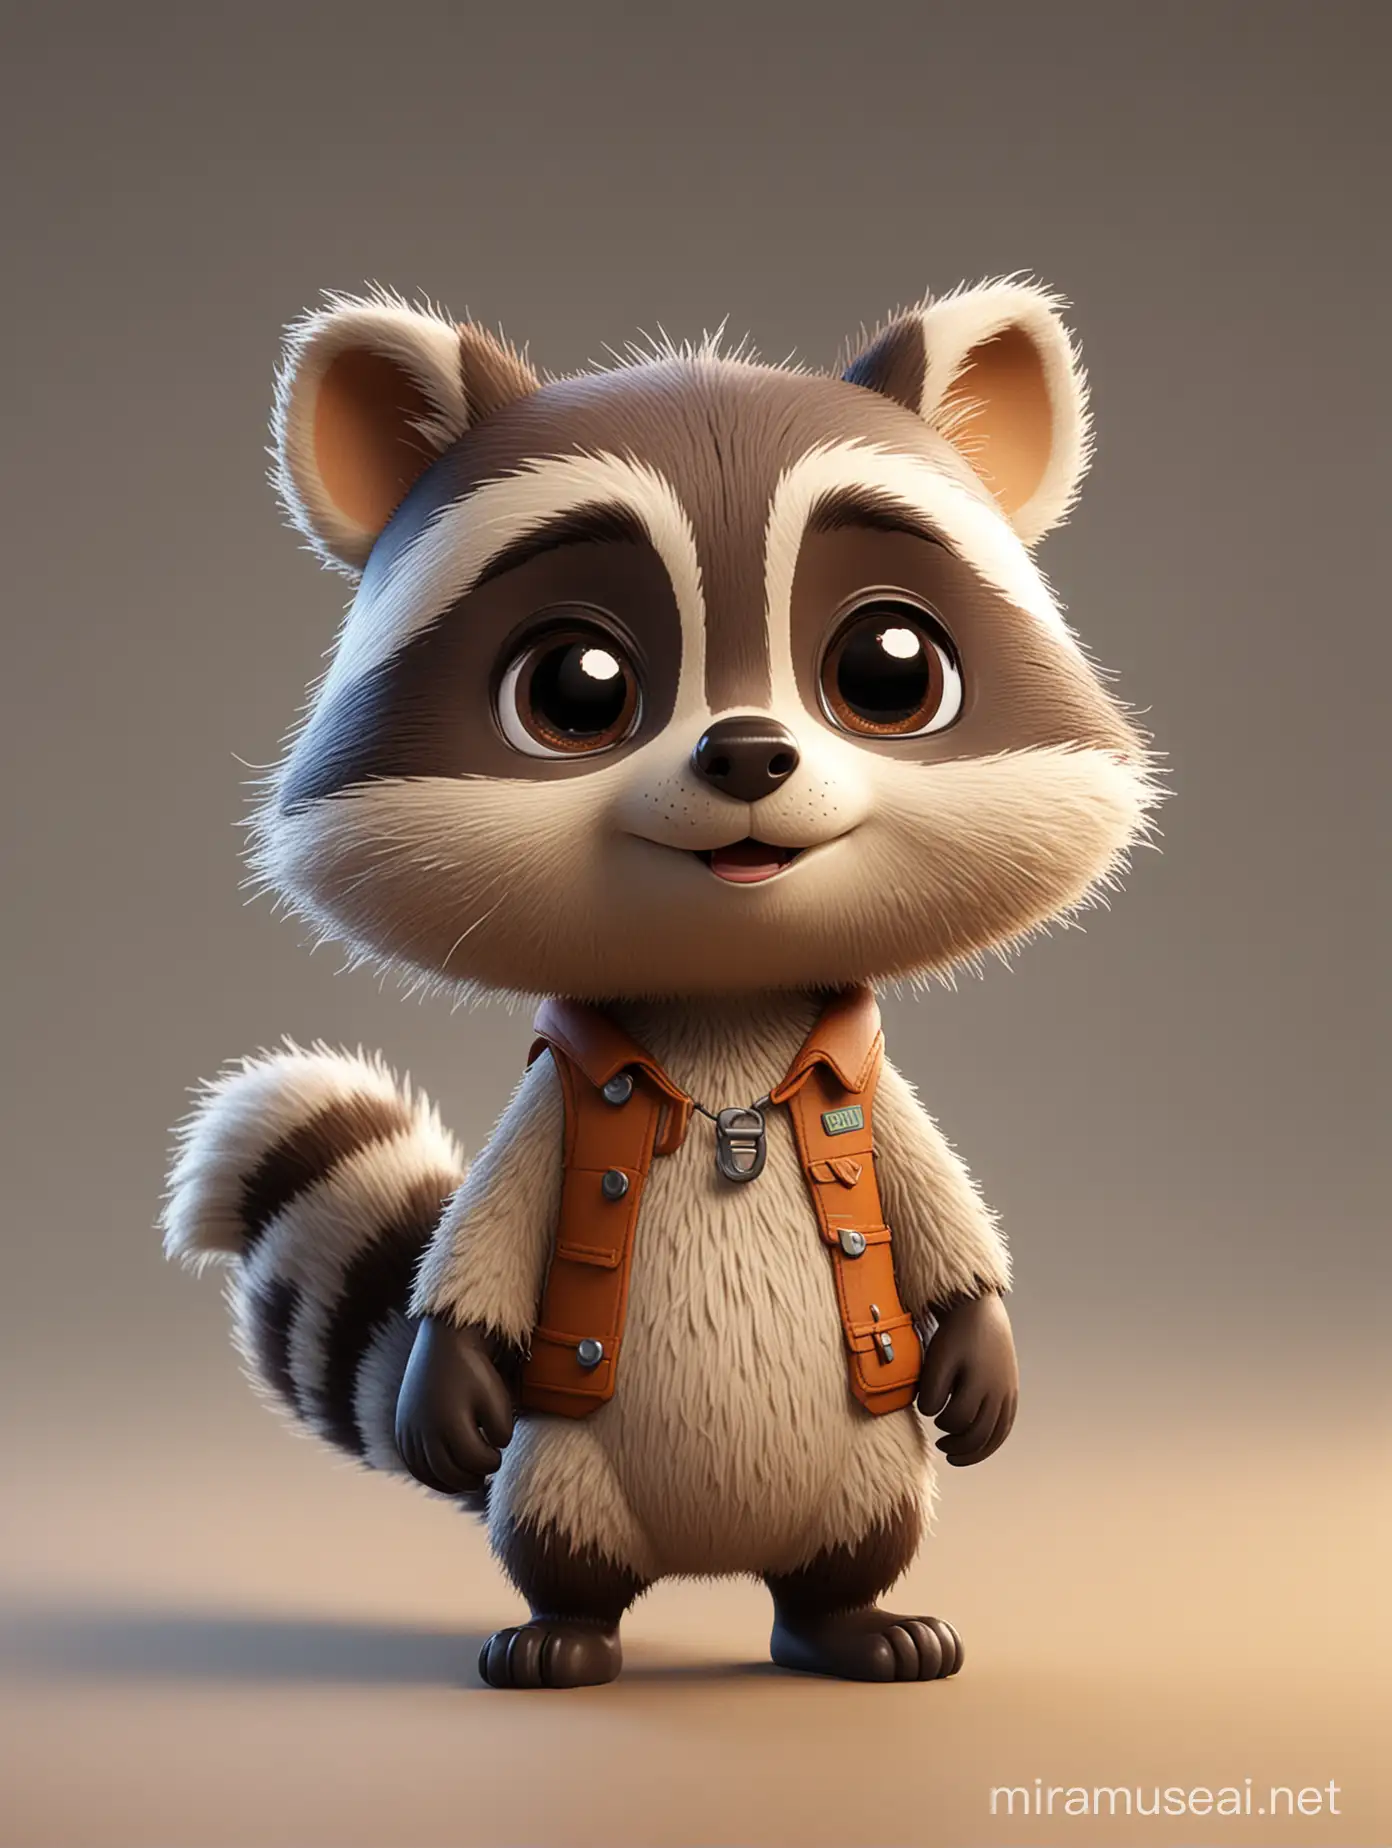 Cute 3D Chibi Raccoon in PixarStyle with Vibrant Wooden Toy Aesthetic